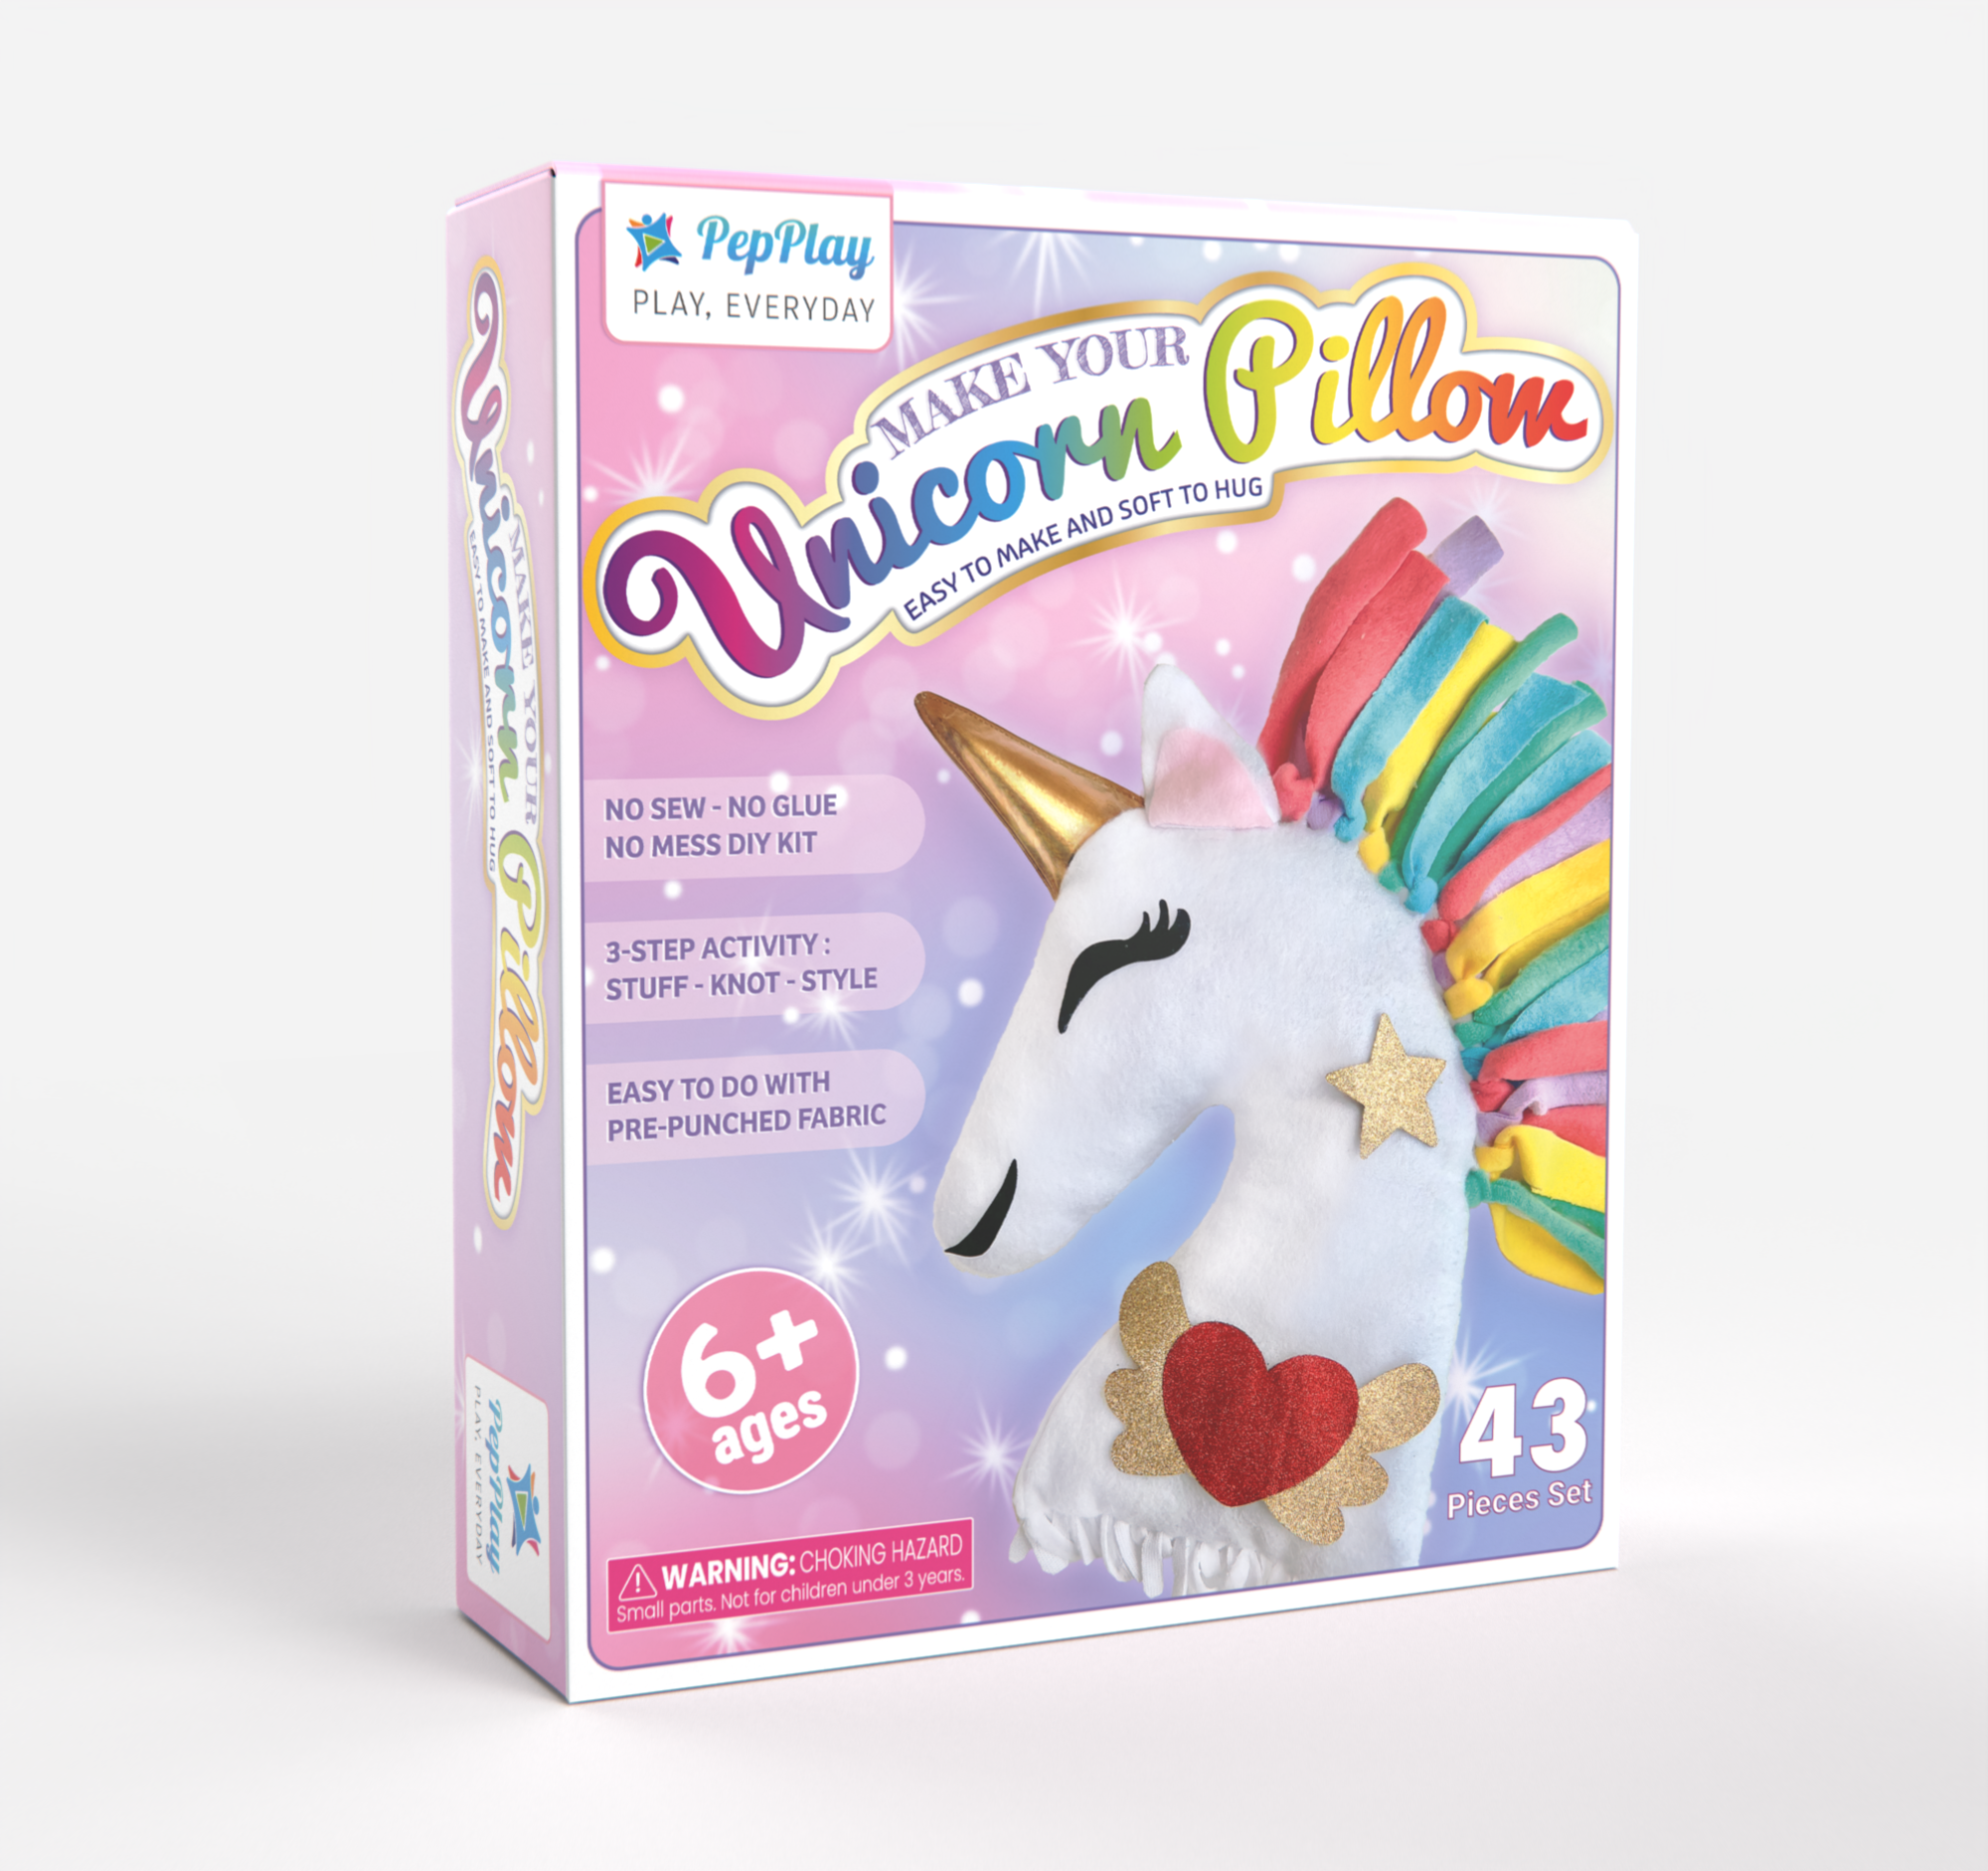 DIY Stuffed Plush Pillow Craft kit for Kids Unicorn Doll Bedroom Decor Project No Sewing Needed 2Pepers Make Your Own Unicorn Pillow Kit Arts and Crafts for Girls Unicorn Gifts for Girls 